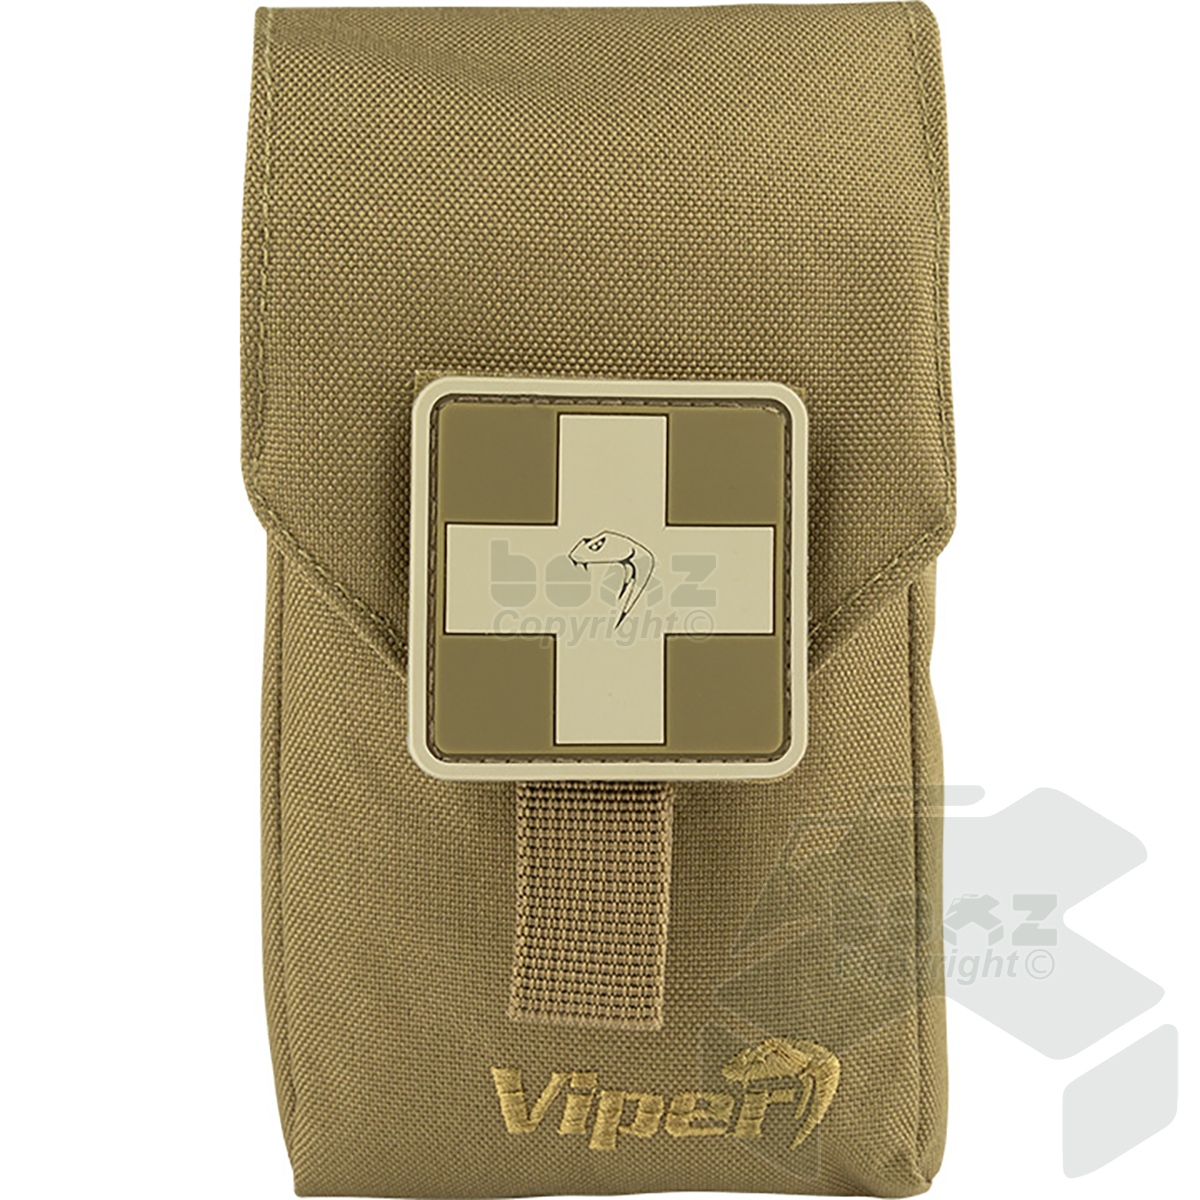 Viper First Aid Kit - Coyote